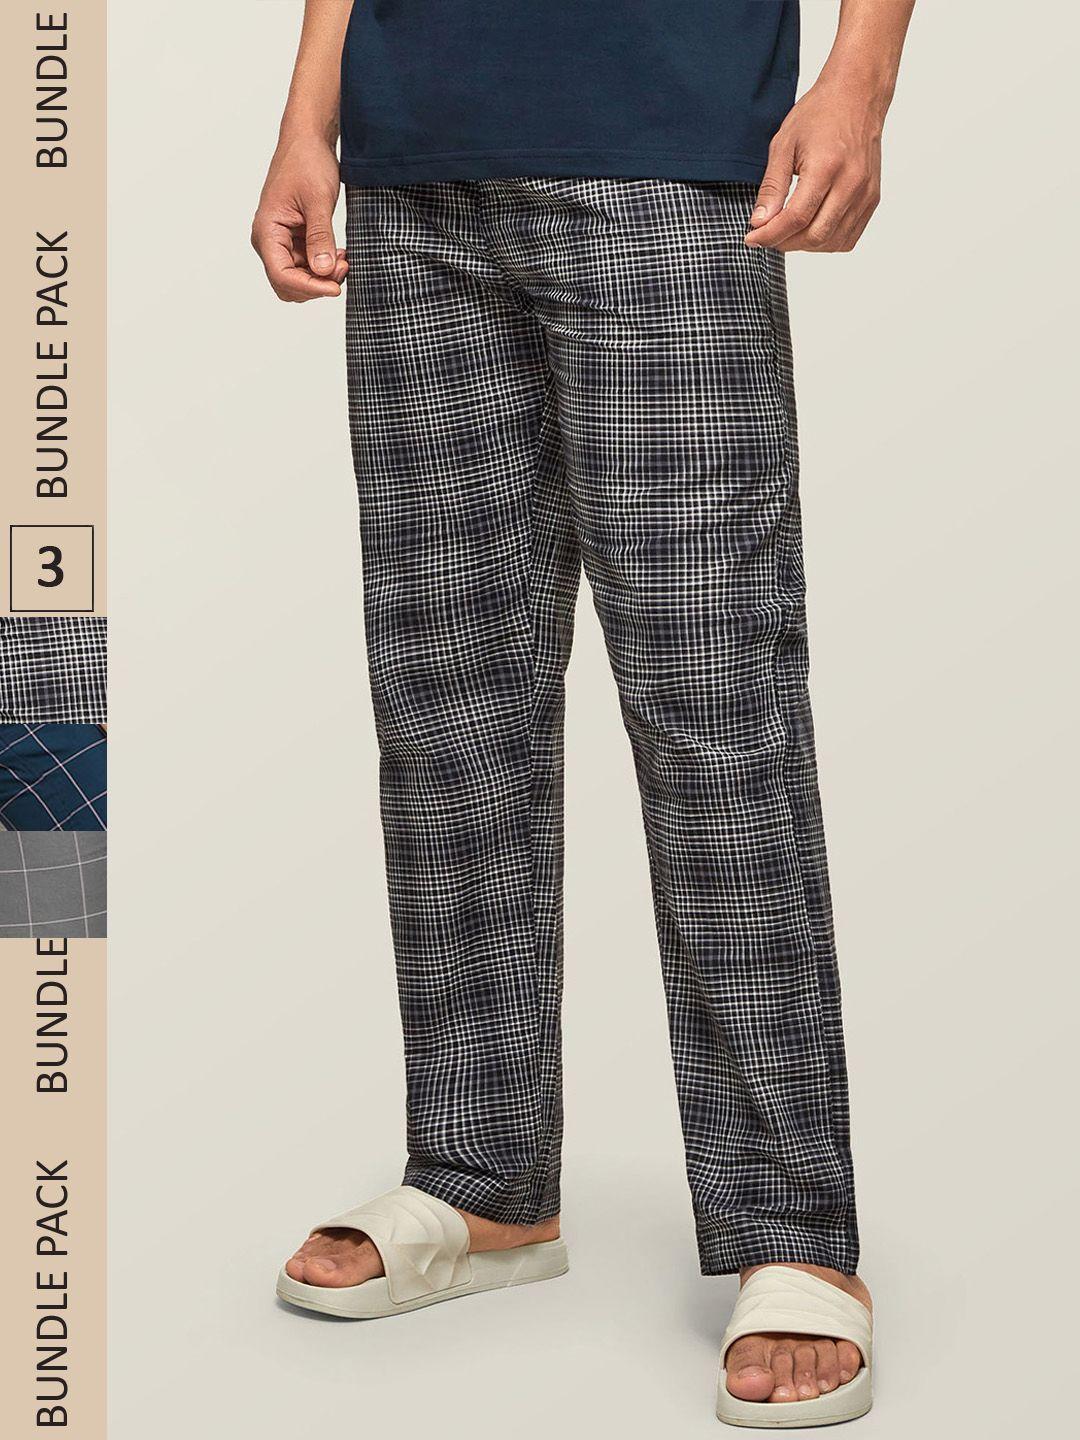 xyxx men super combed cotton pack of 3 checkmate lounge pants xypyjm3pckn57